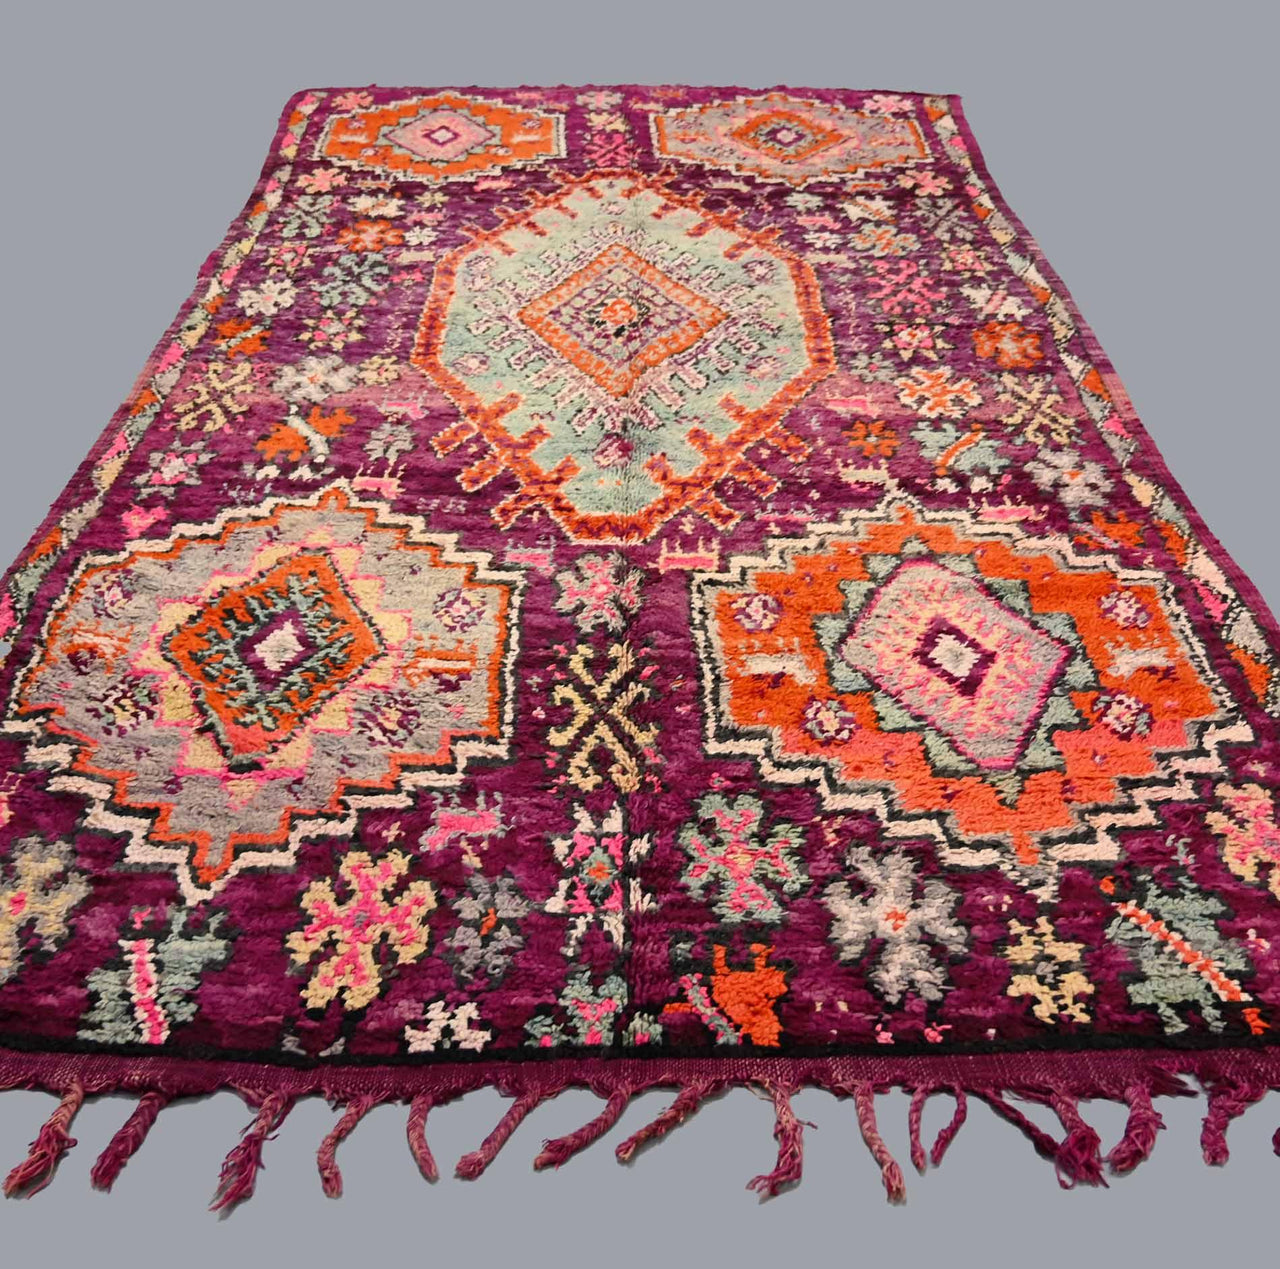 Endurance Moroccan Abstract Rug 6 x 13 ft / 183 x 397 cm - Ettilux Home